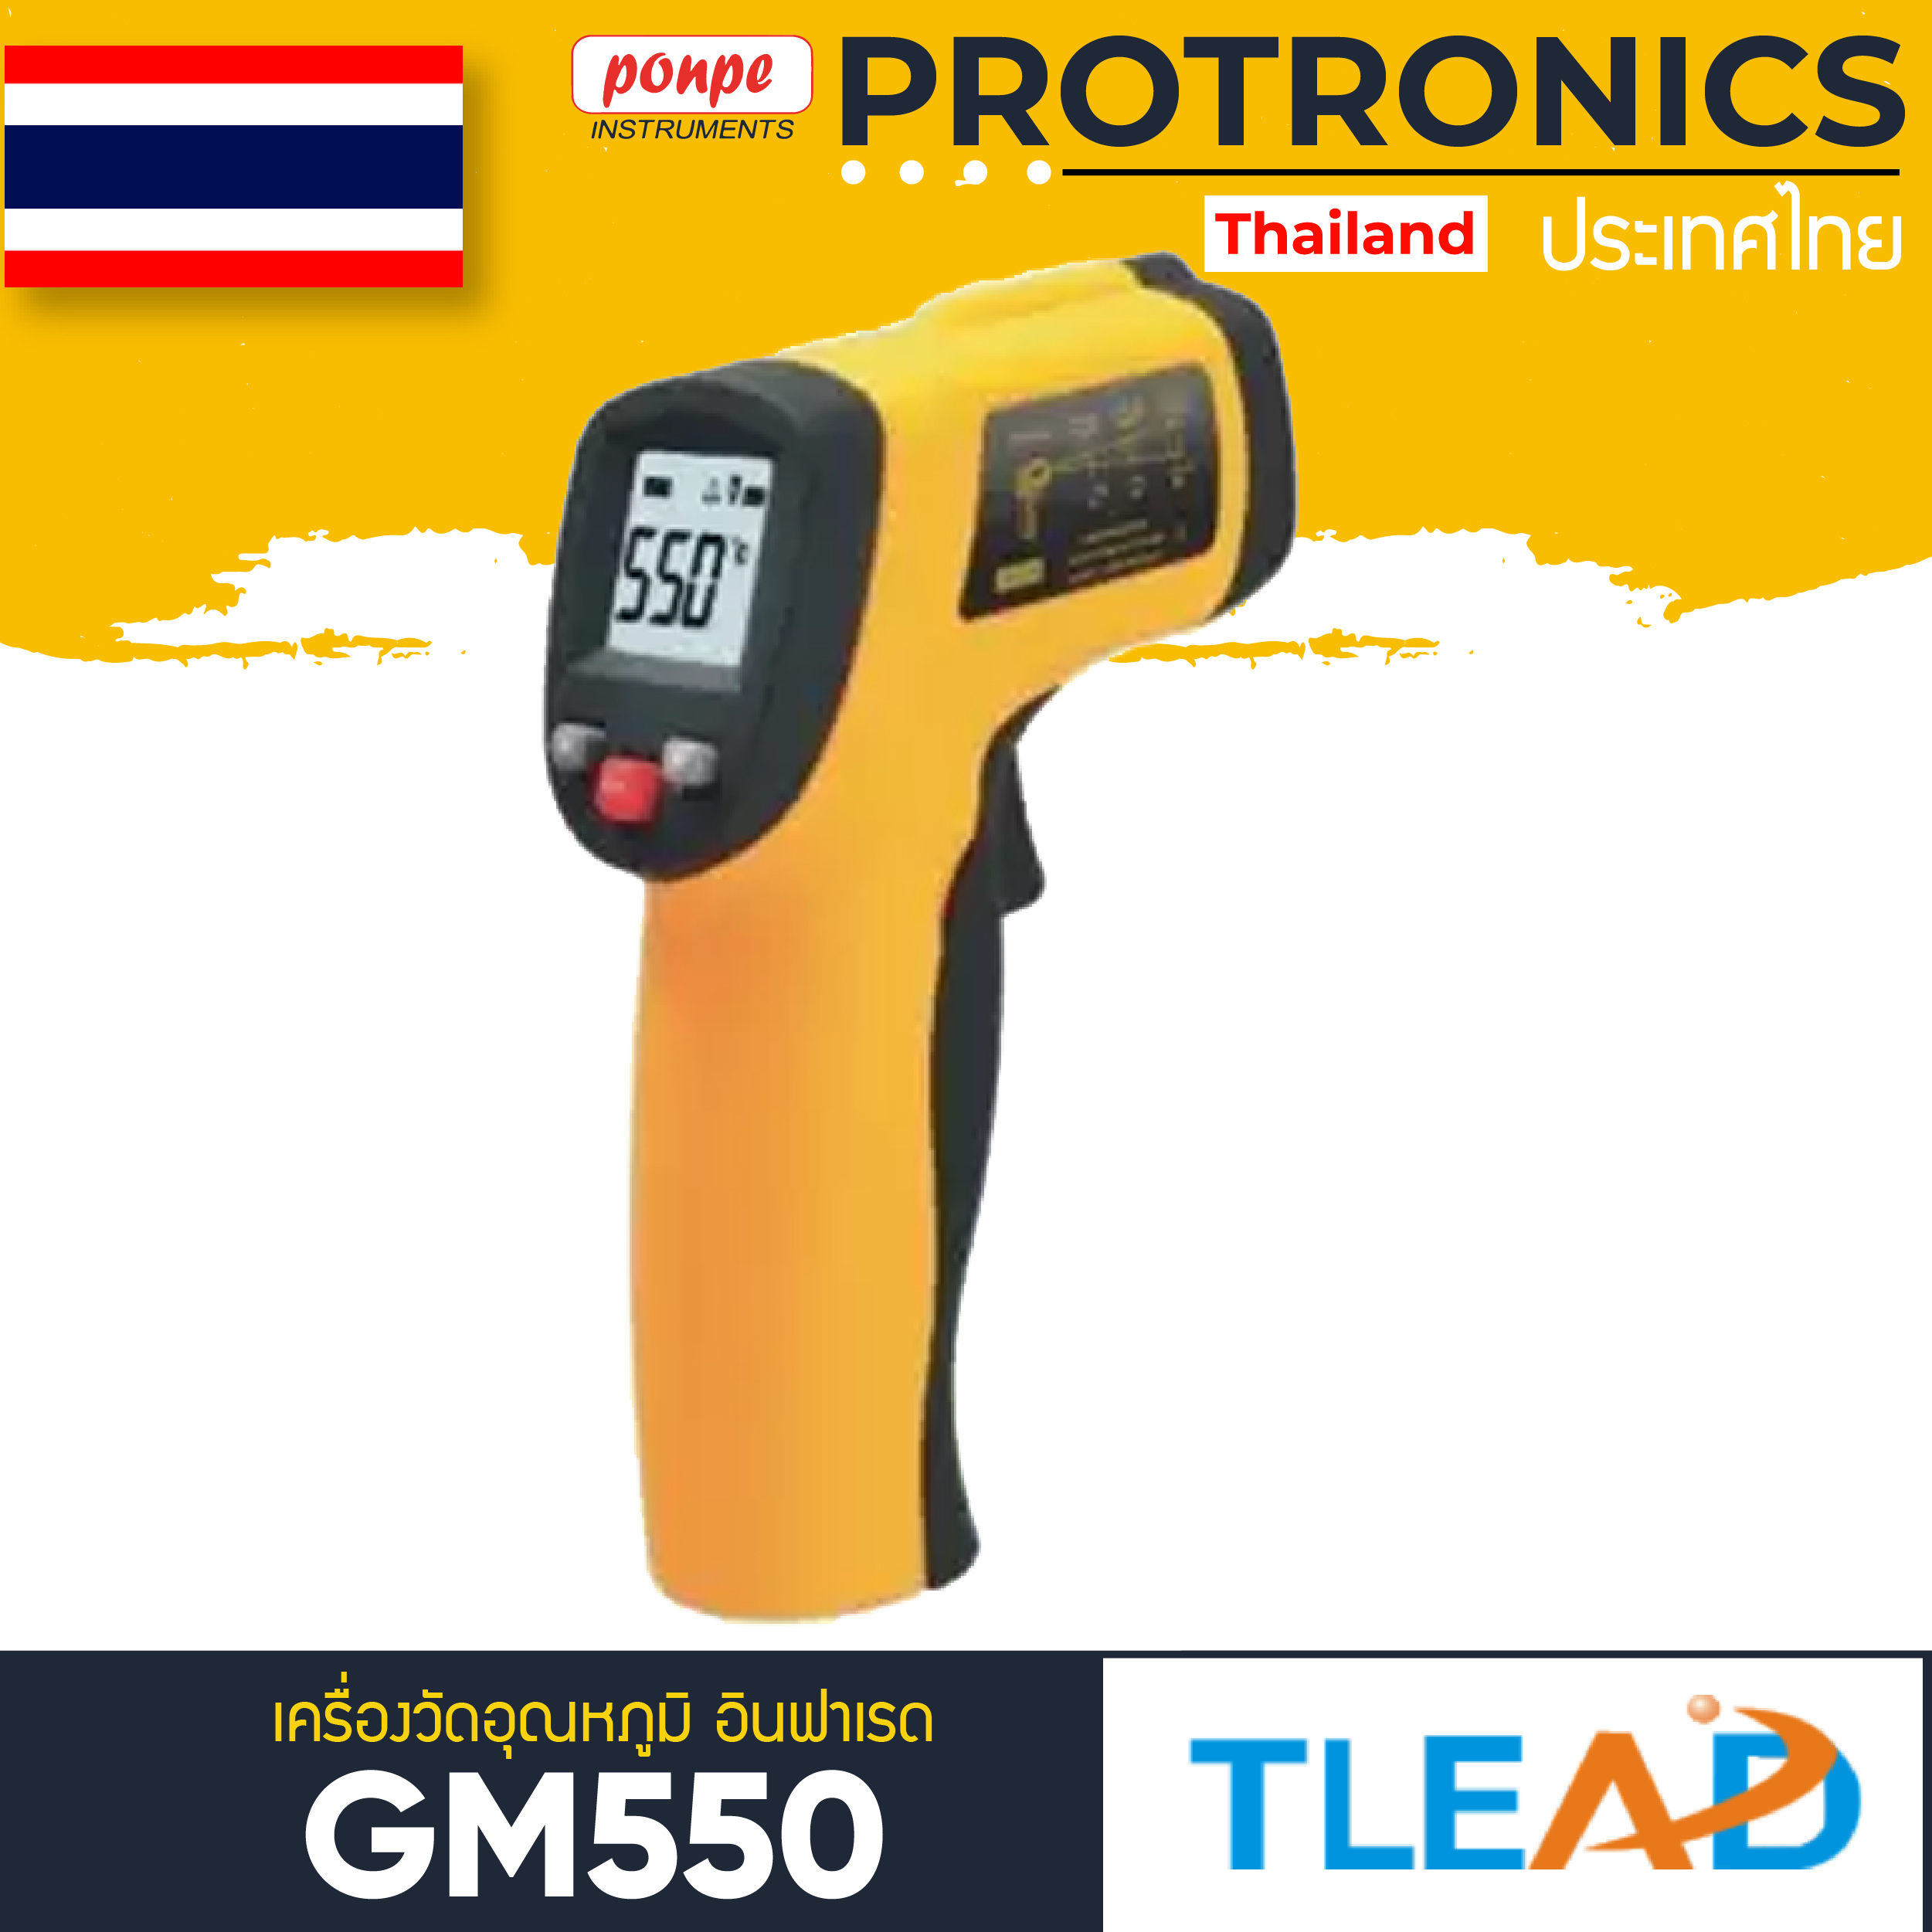 INFRARED THERMOMETER GM550